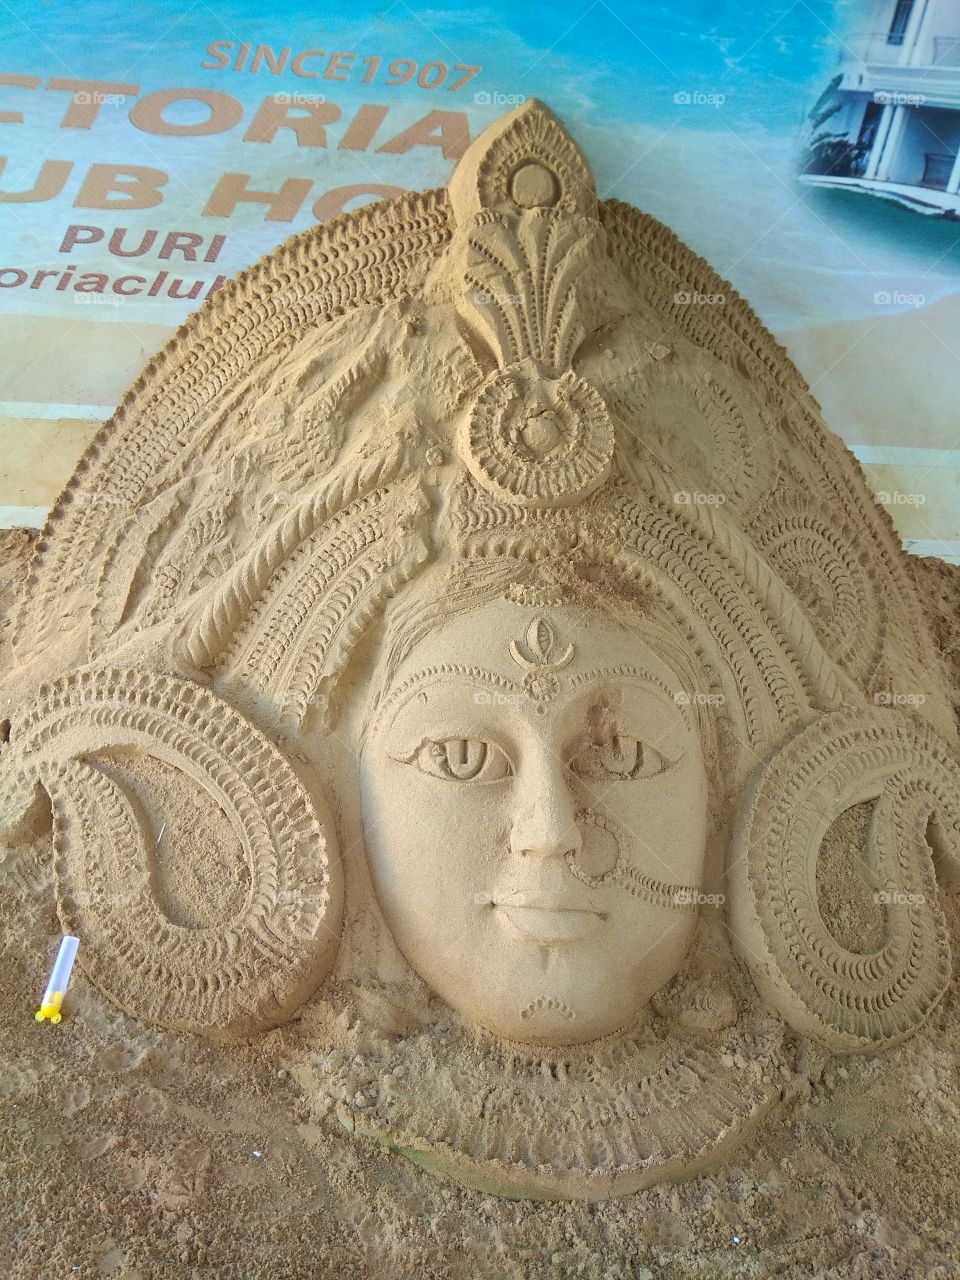 Sand art. I came across this art in a hotel in Puri last autumn. I really wonder how can artists be so meticulous!